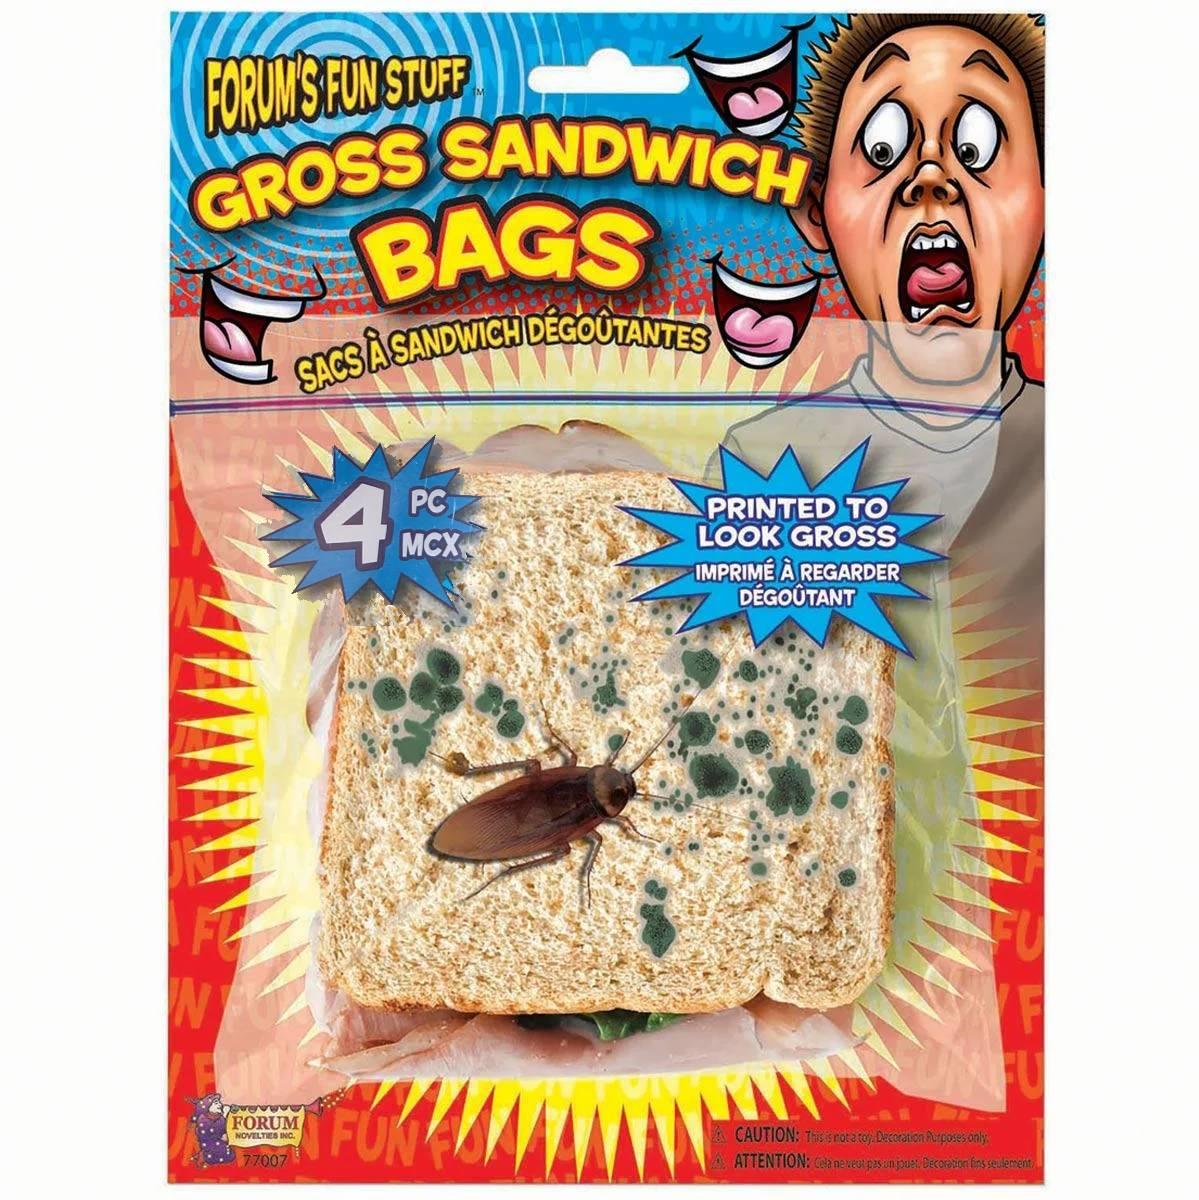 Gross Out Sandwich Bags by Forum Novelties 77007 available here at Karnival Costumes online party shop